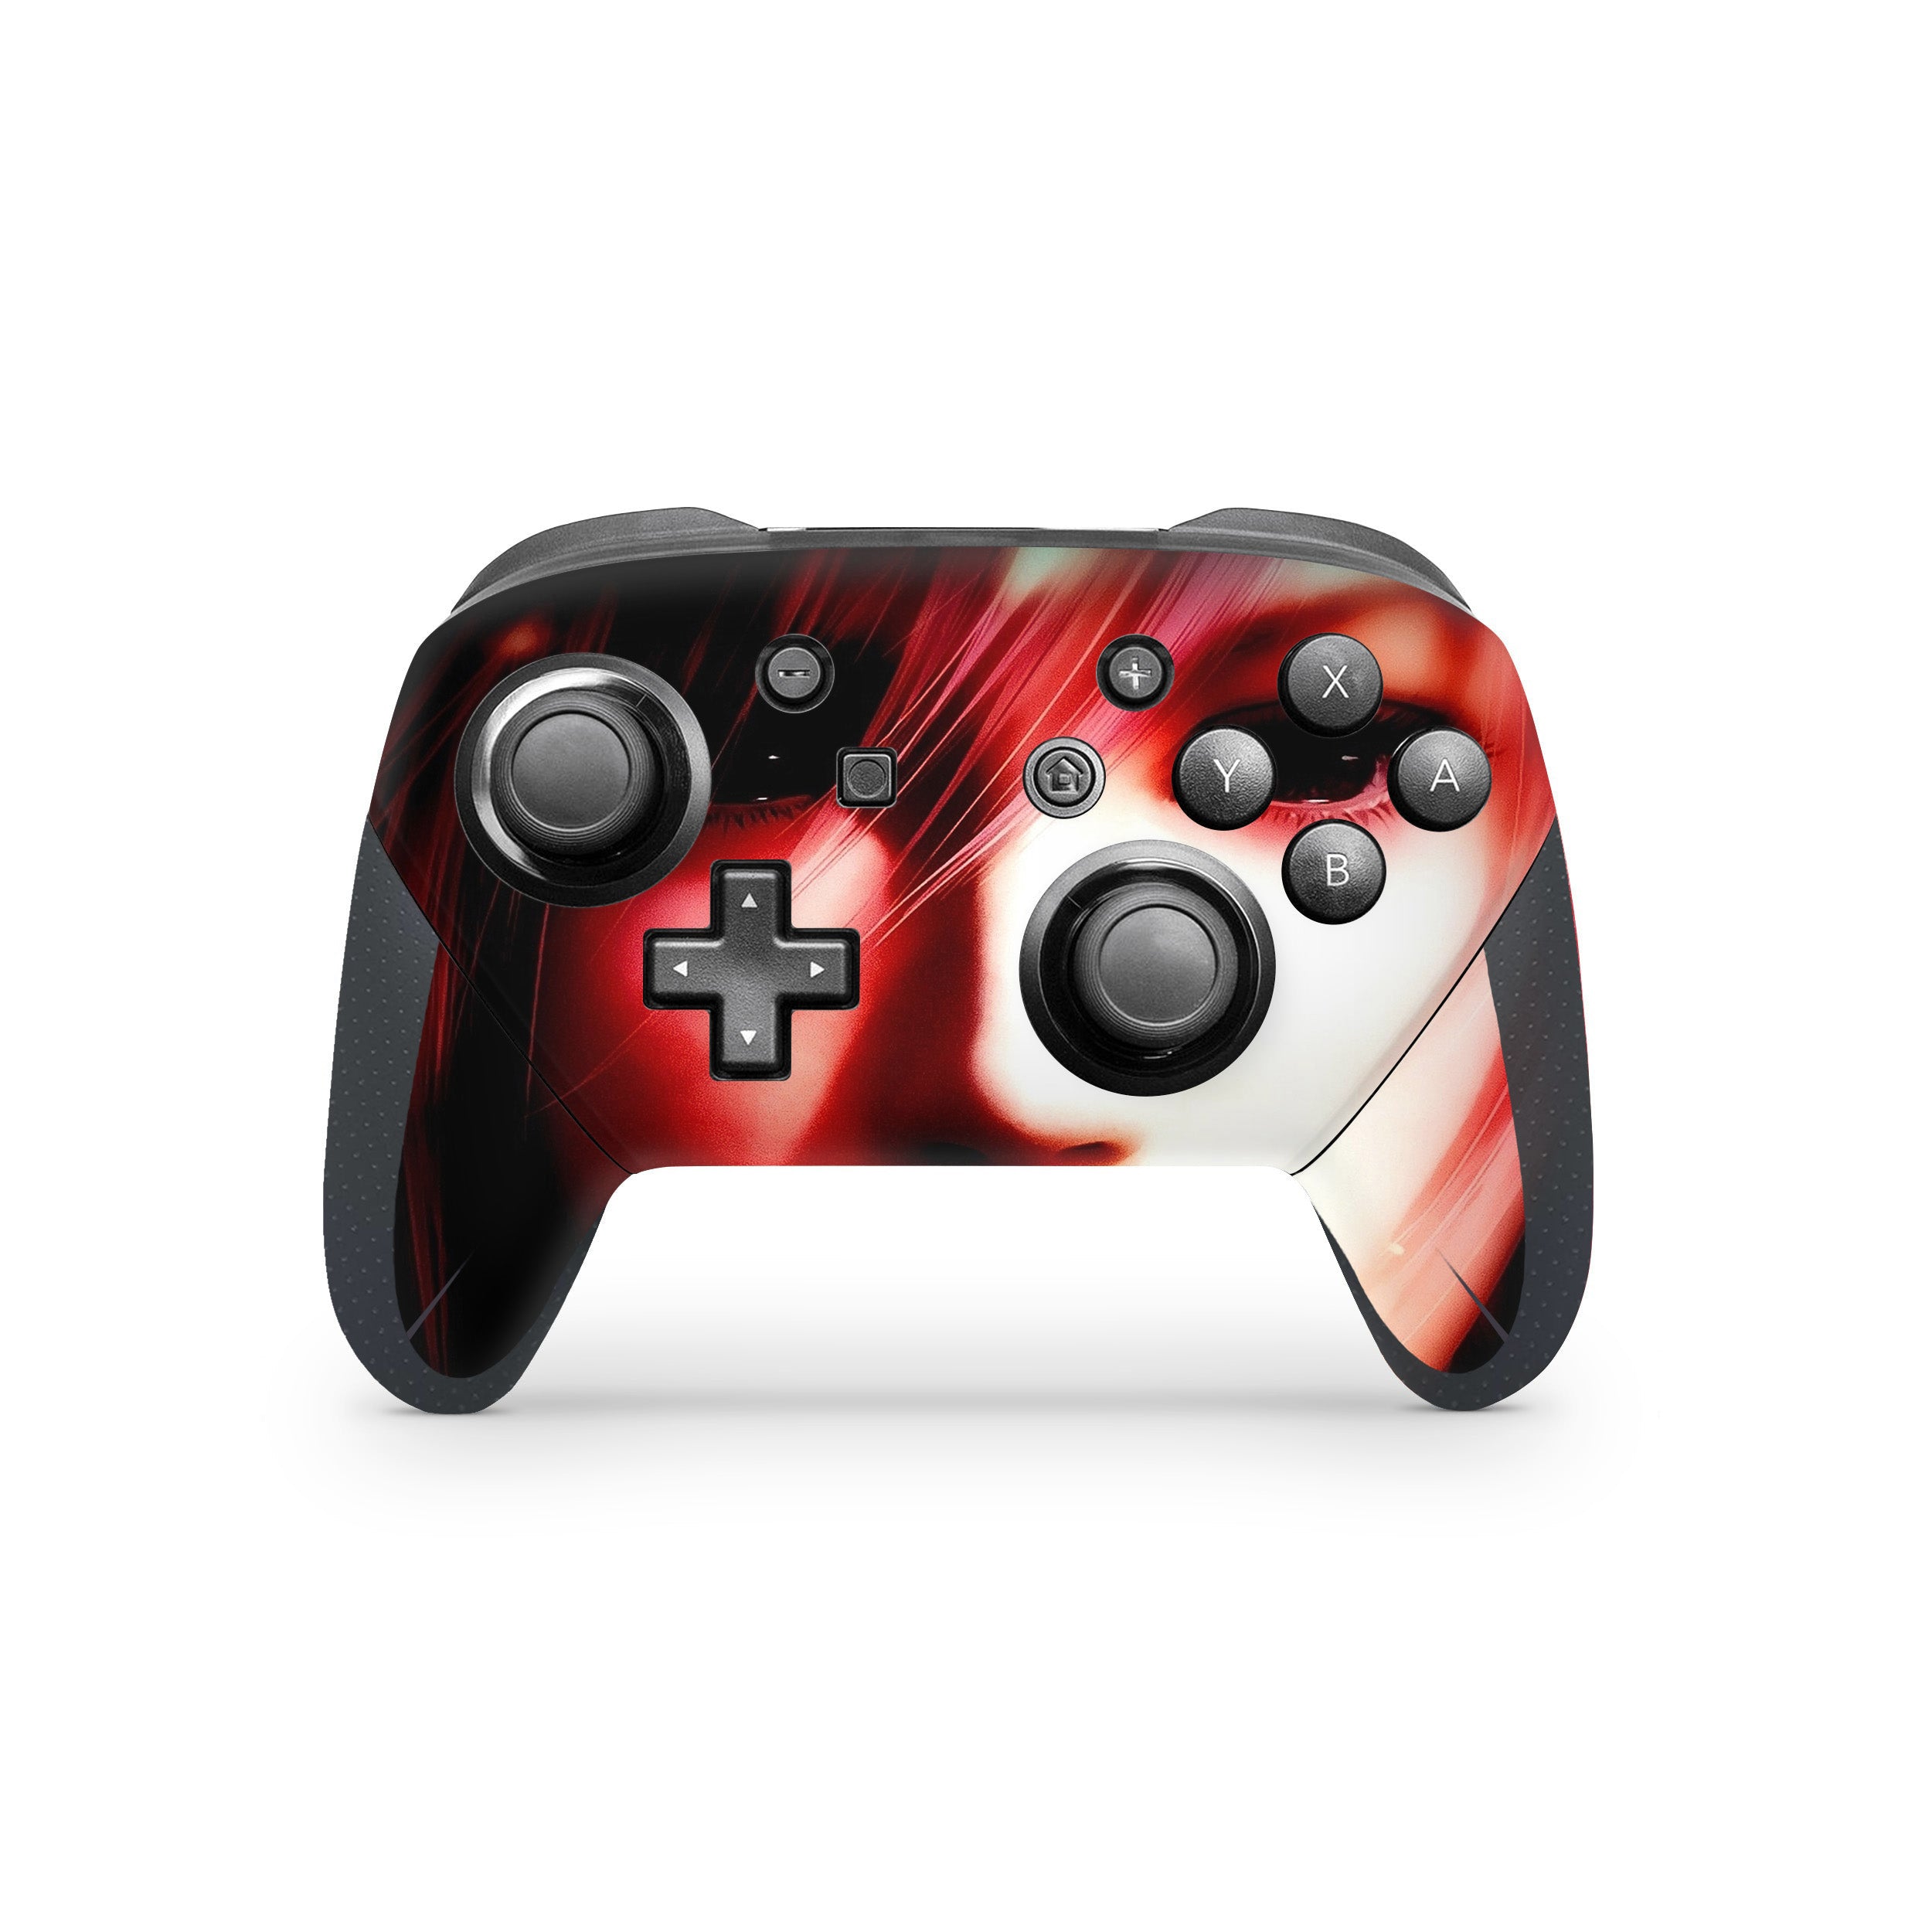 A video game skin featuring a Final Fantasy 13 Lightning design for the Switch Pro Controller.